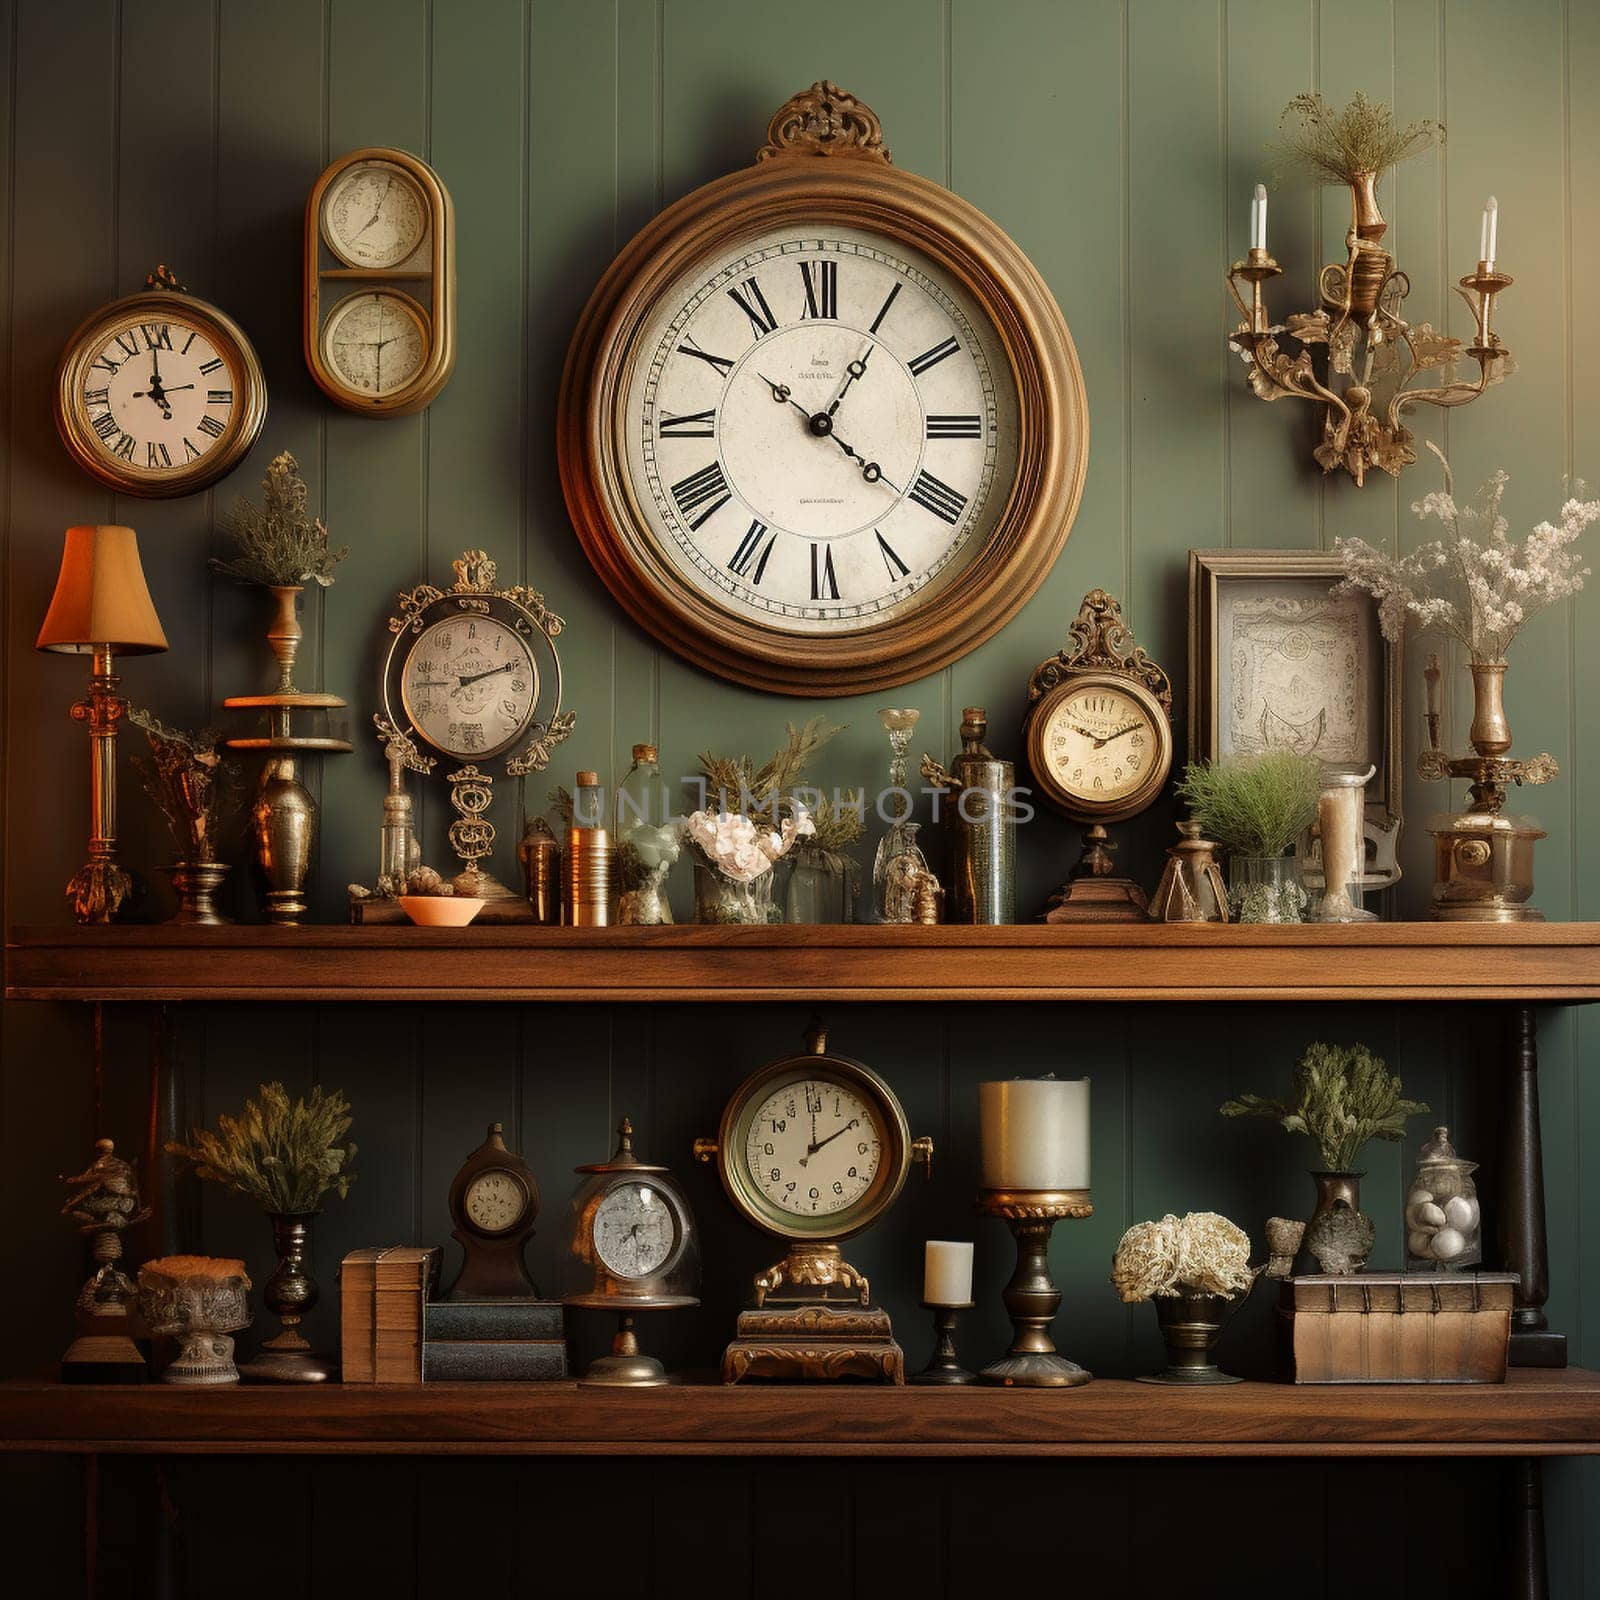 Step into the past with this realistic art style image featuring a collection of vintage clocks arranged on a wooden shelf. The backdrop is a cozy vintage-themed interior that evokes a sense of nostalgia and warmth. Each clock in the collection showcases unique designs, with intricate details and retro aesthetics. The clocks vary in size, shape, and style, ranging from ornate classical designs to sleek mid-century modern styles. The lighting in the scene emphasizes warm tones, enhancing the nostalgic ambiance. A soft focus effect adds to the sentimental atmosphere of the image.